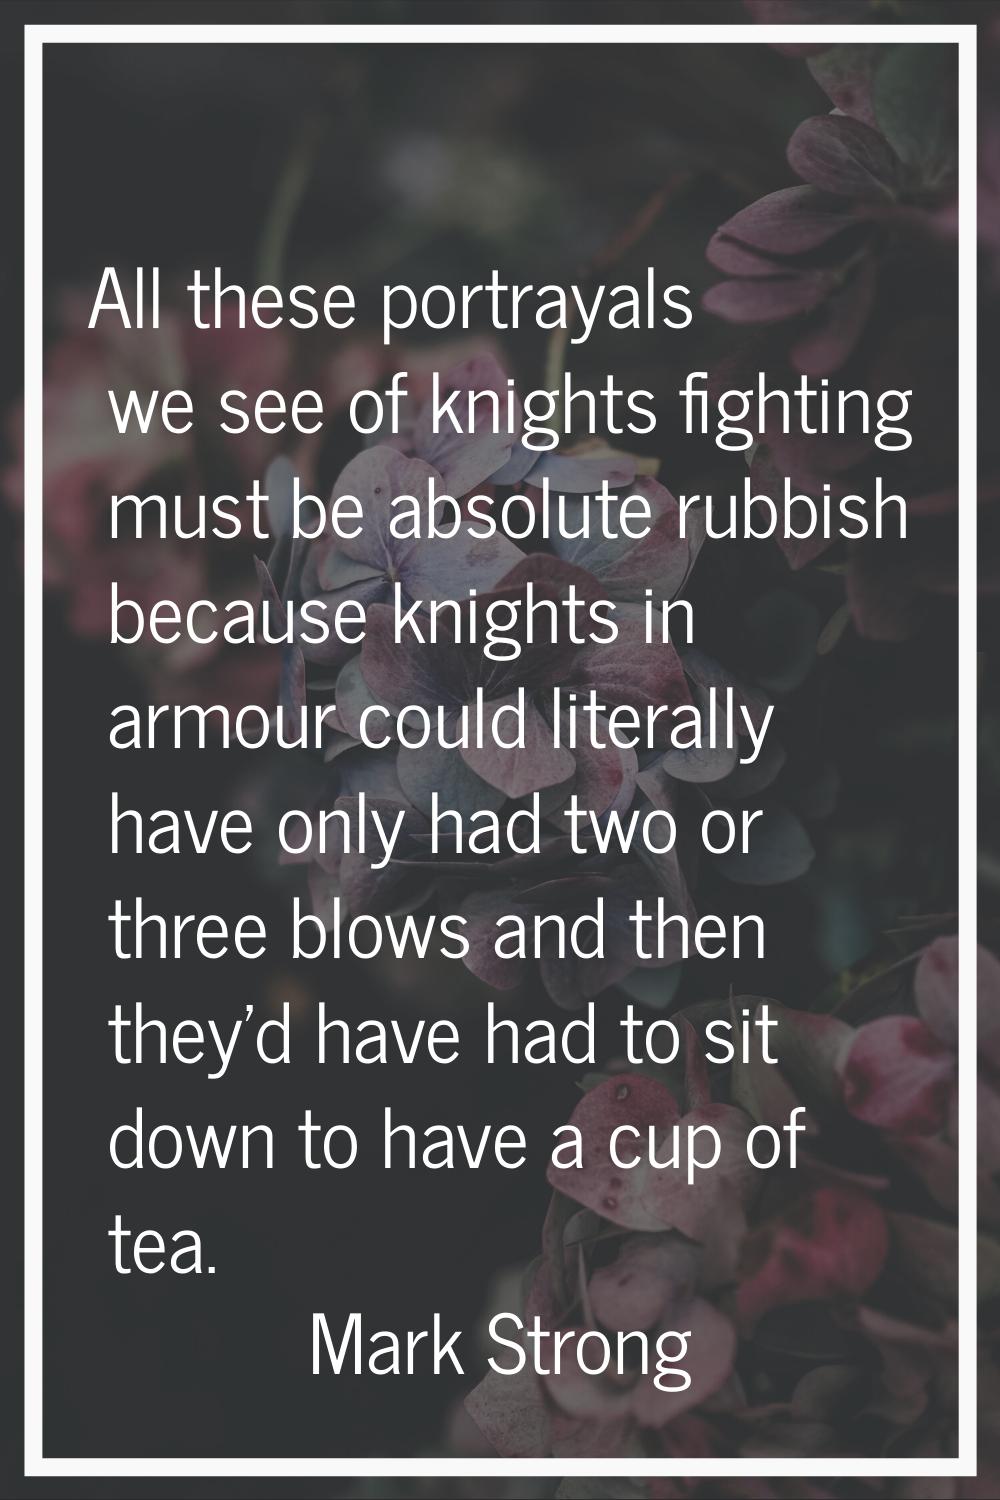 All these portrayals we see of knights fighting must be absolute rubbish because knights in armour 